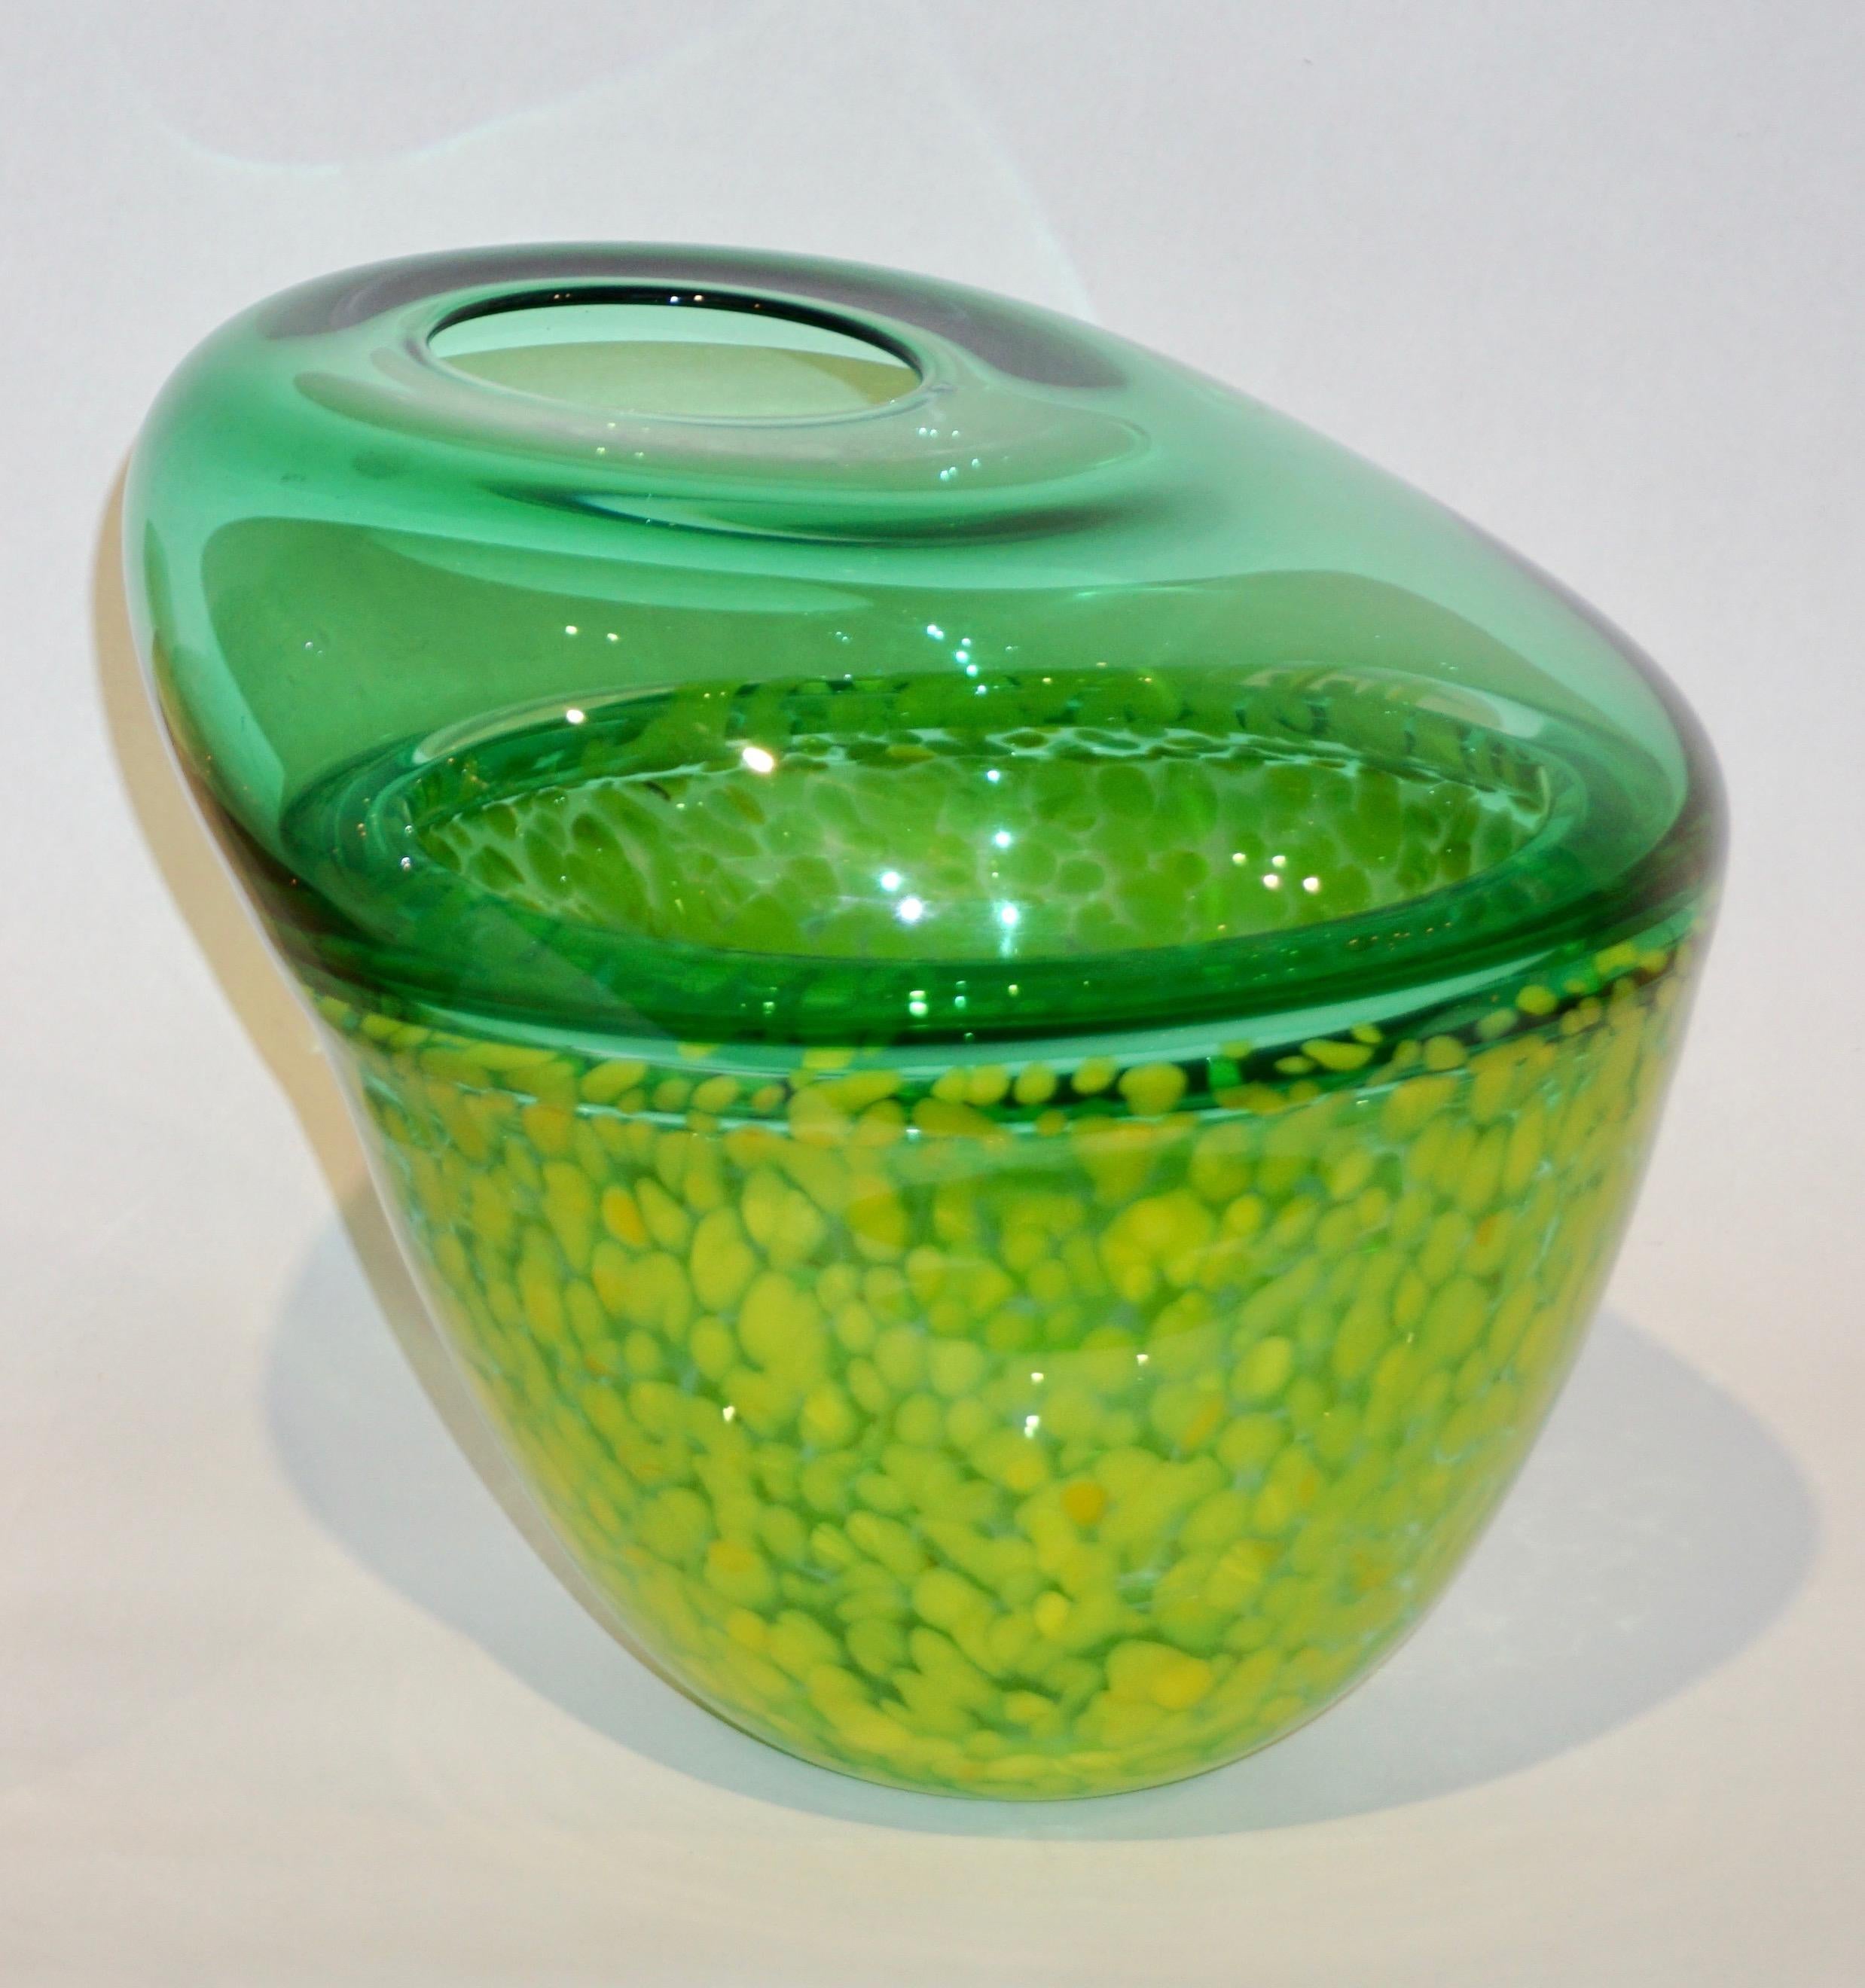 Hilton McConnico by Formia 1990s Italian Green Spotted Murano Art Glass Vase 5